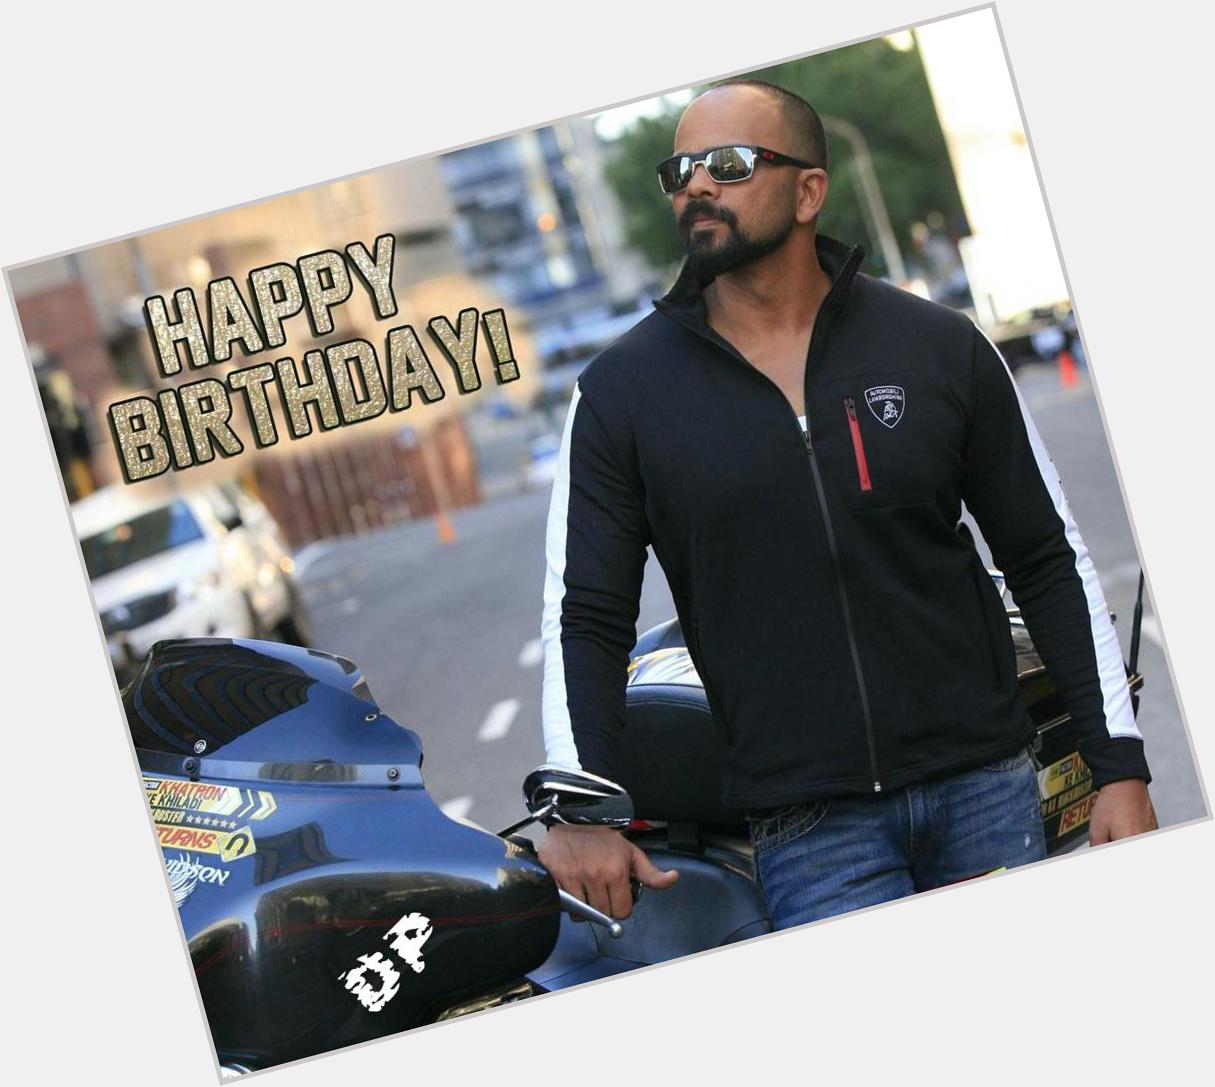 Happy Birthday Rohit Shetty...
Congrads to announce Dilwale with the King..... 